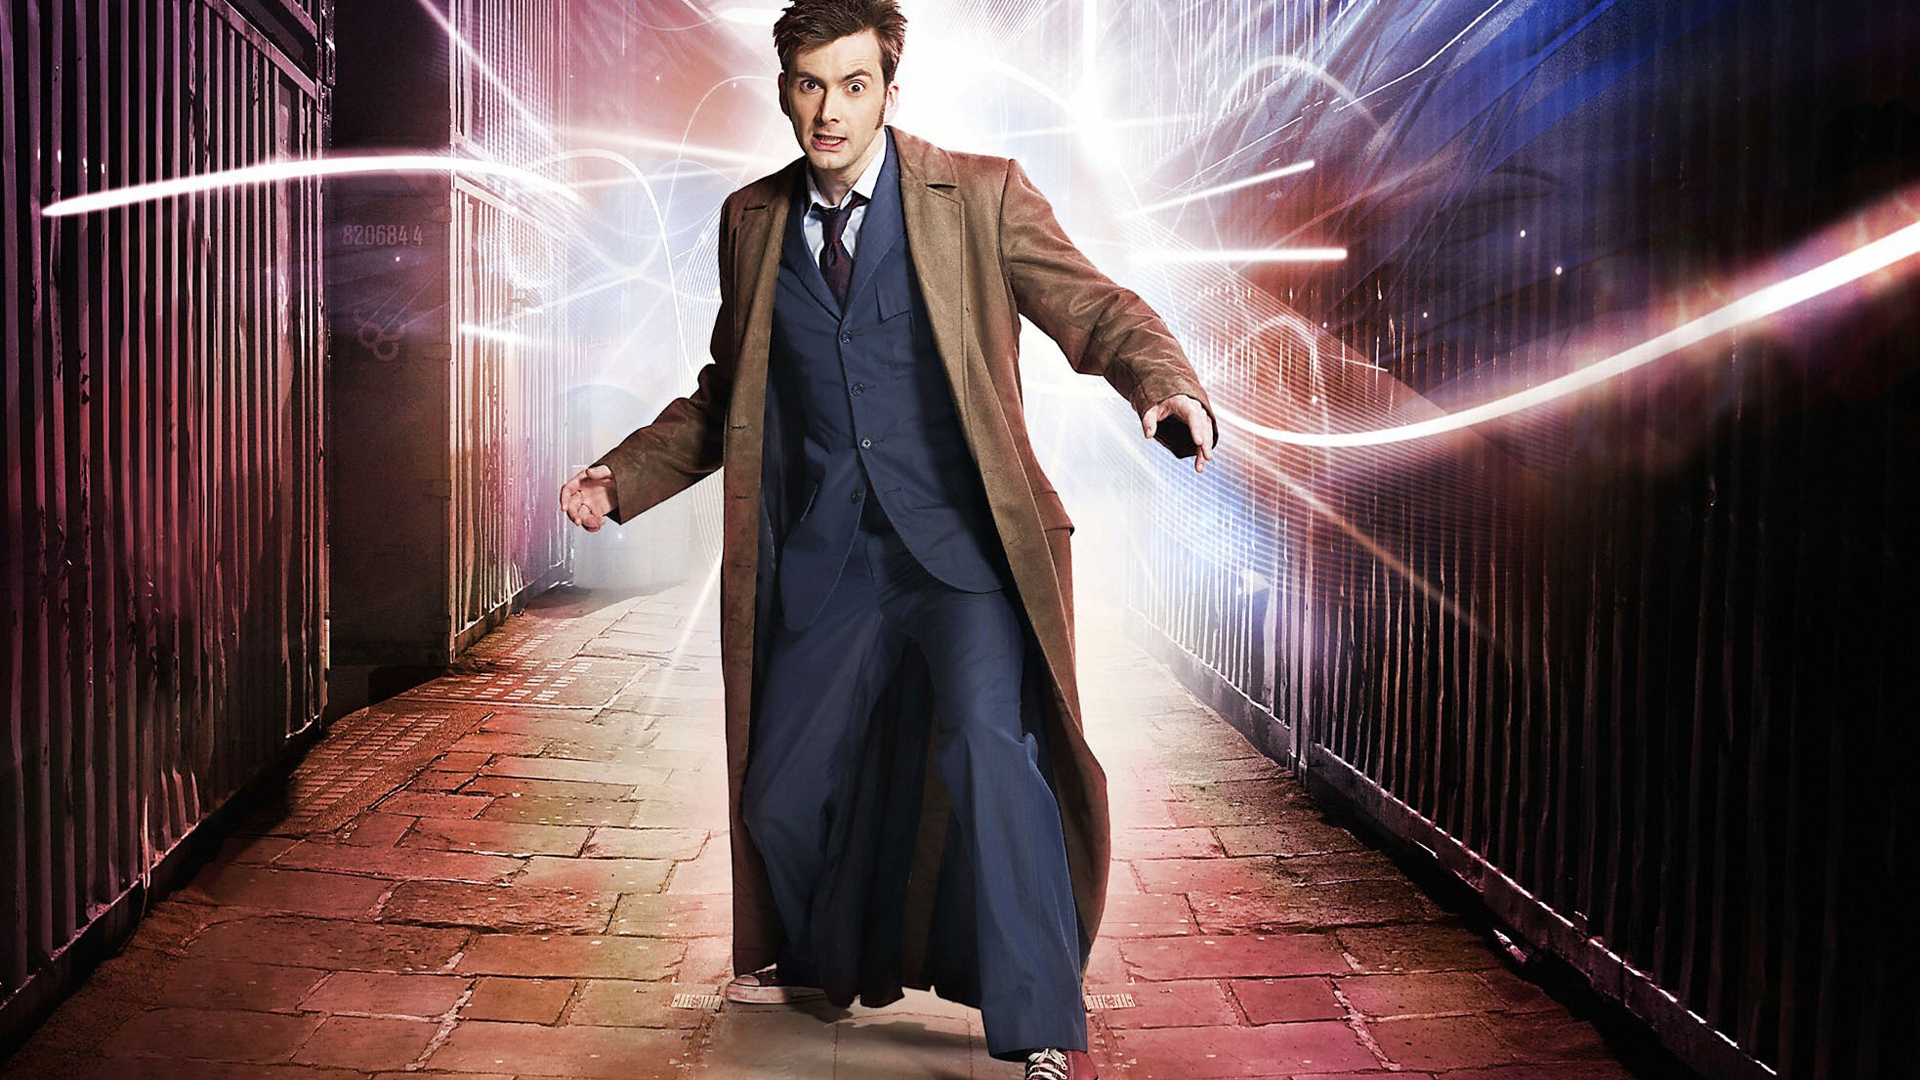 Free HQ Doctor Who Wallpaper - Free HQ Wallpapers